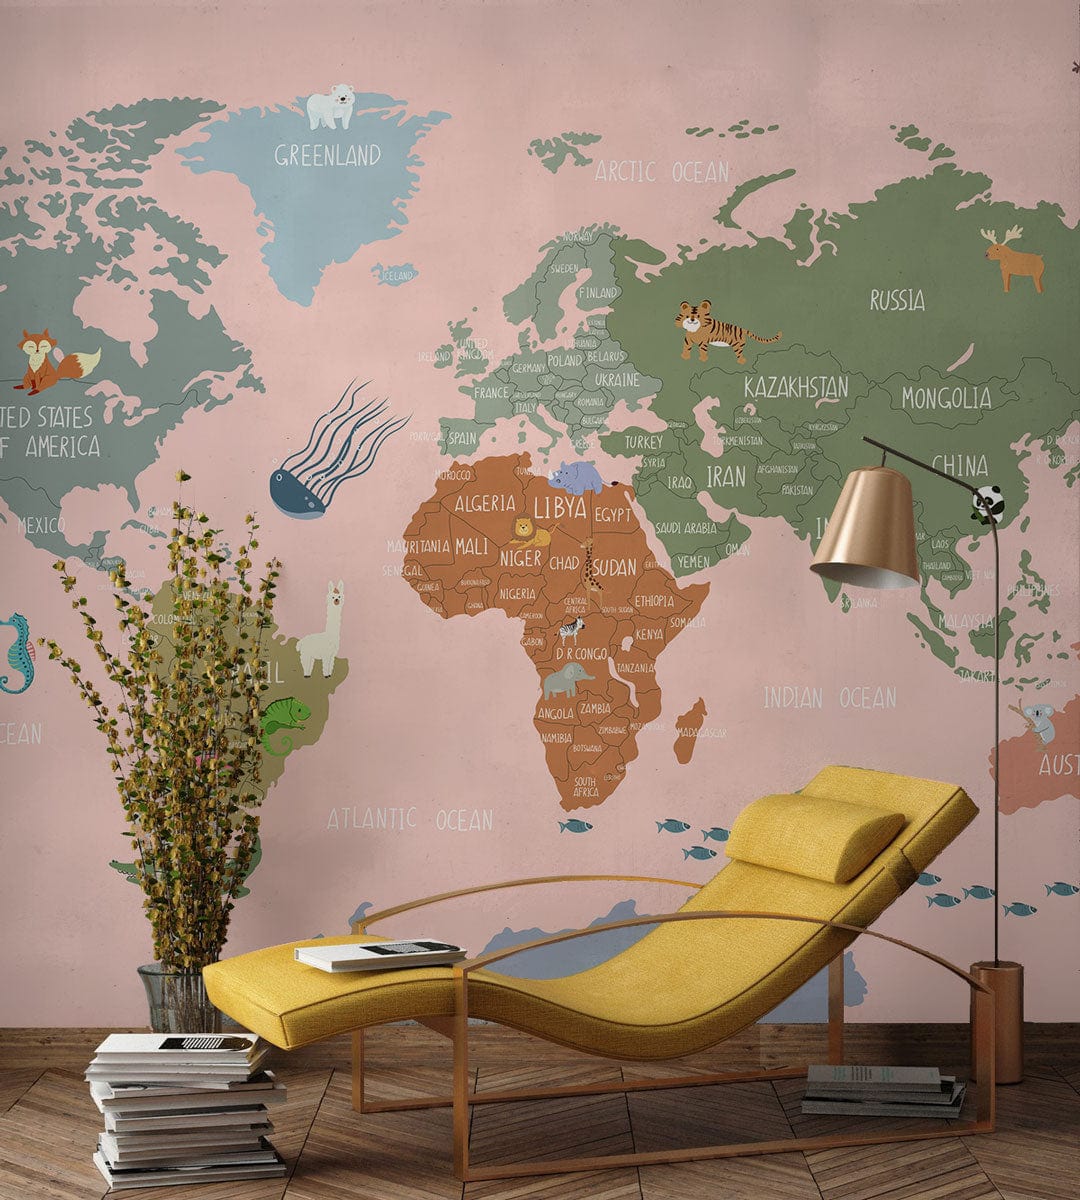 Wallpaper mural depicting a pink cartoon map for use in the decoration of the hallway